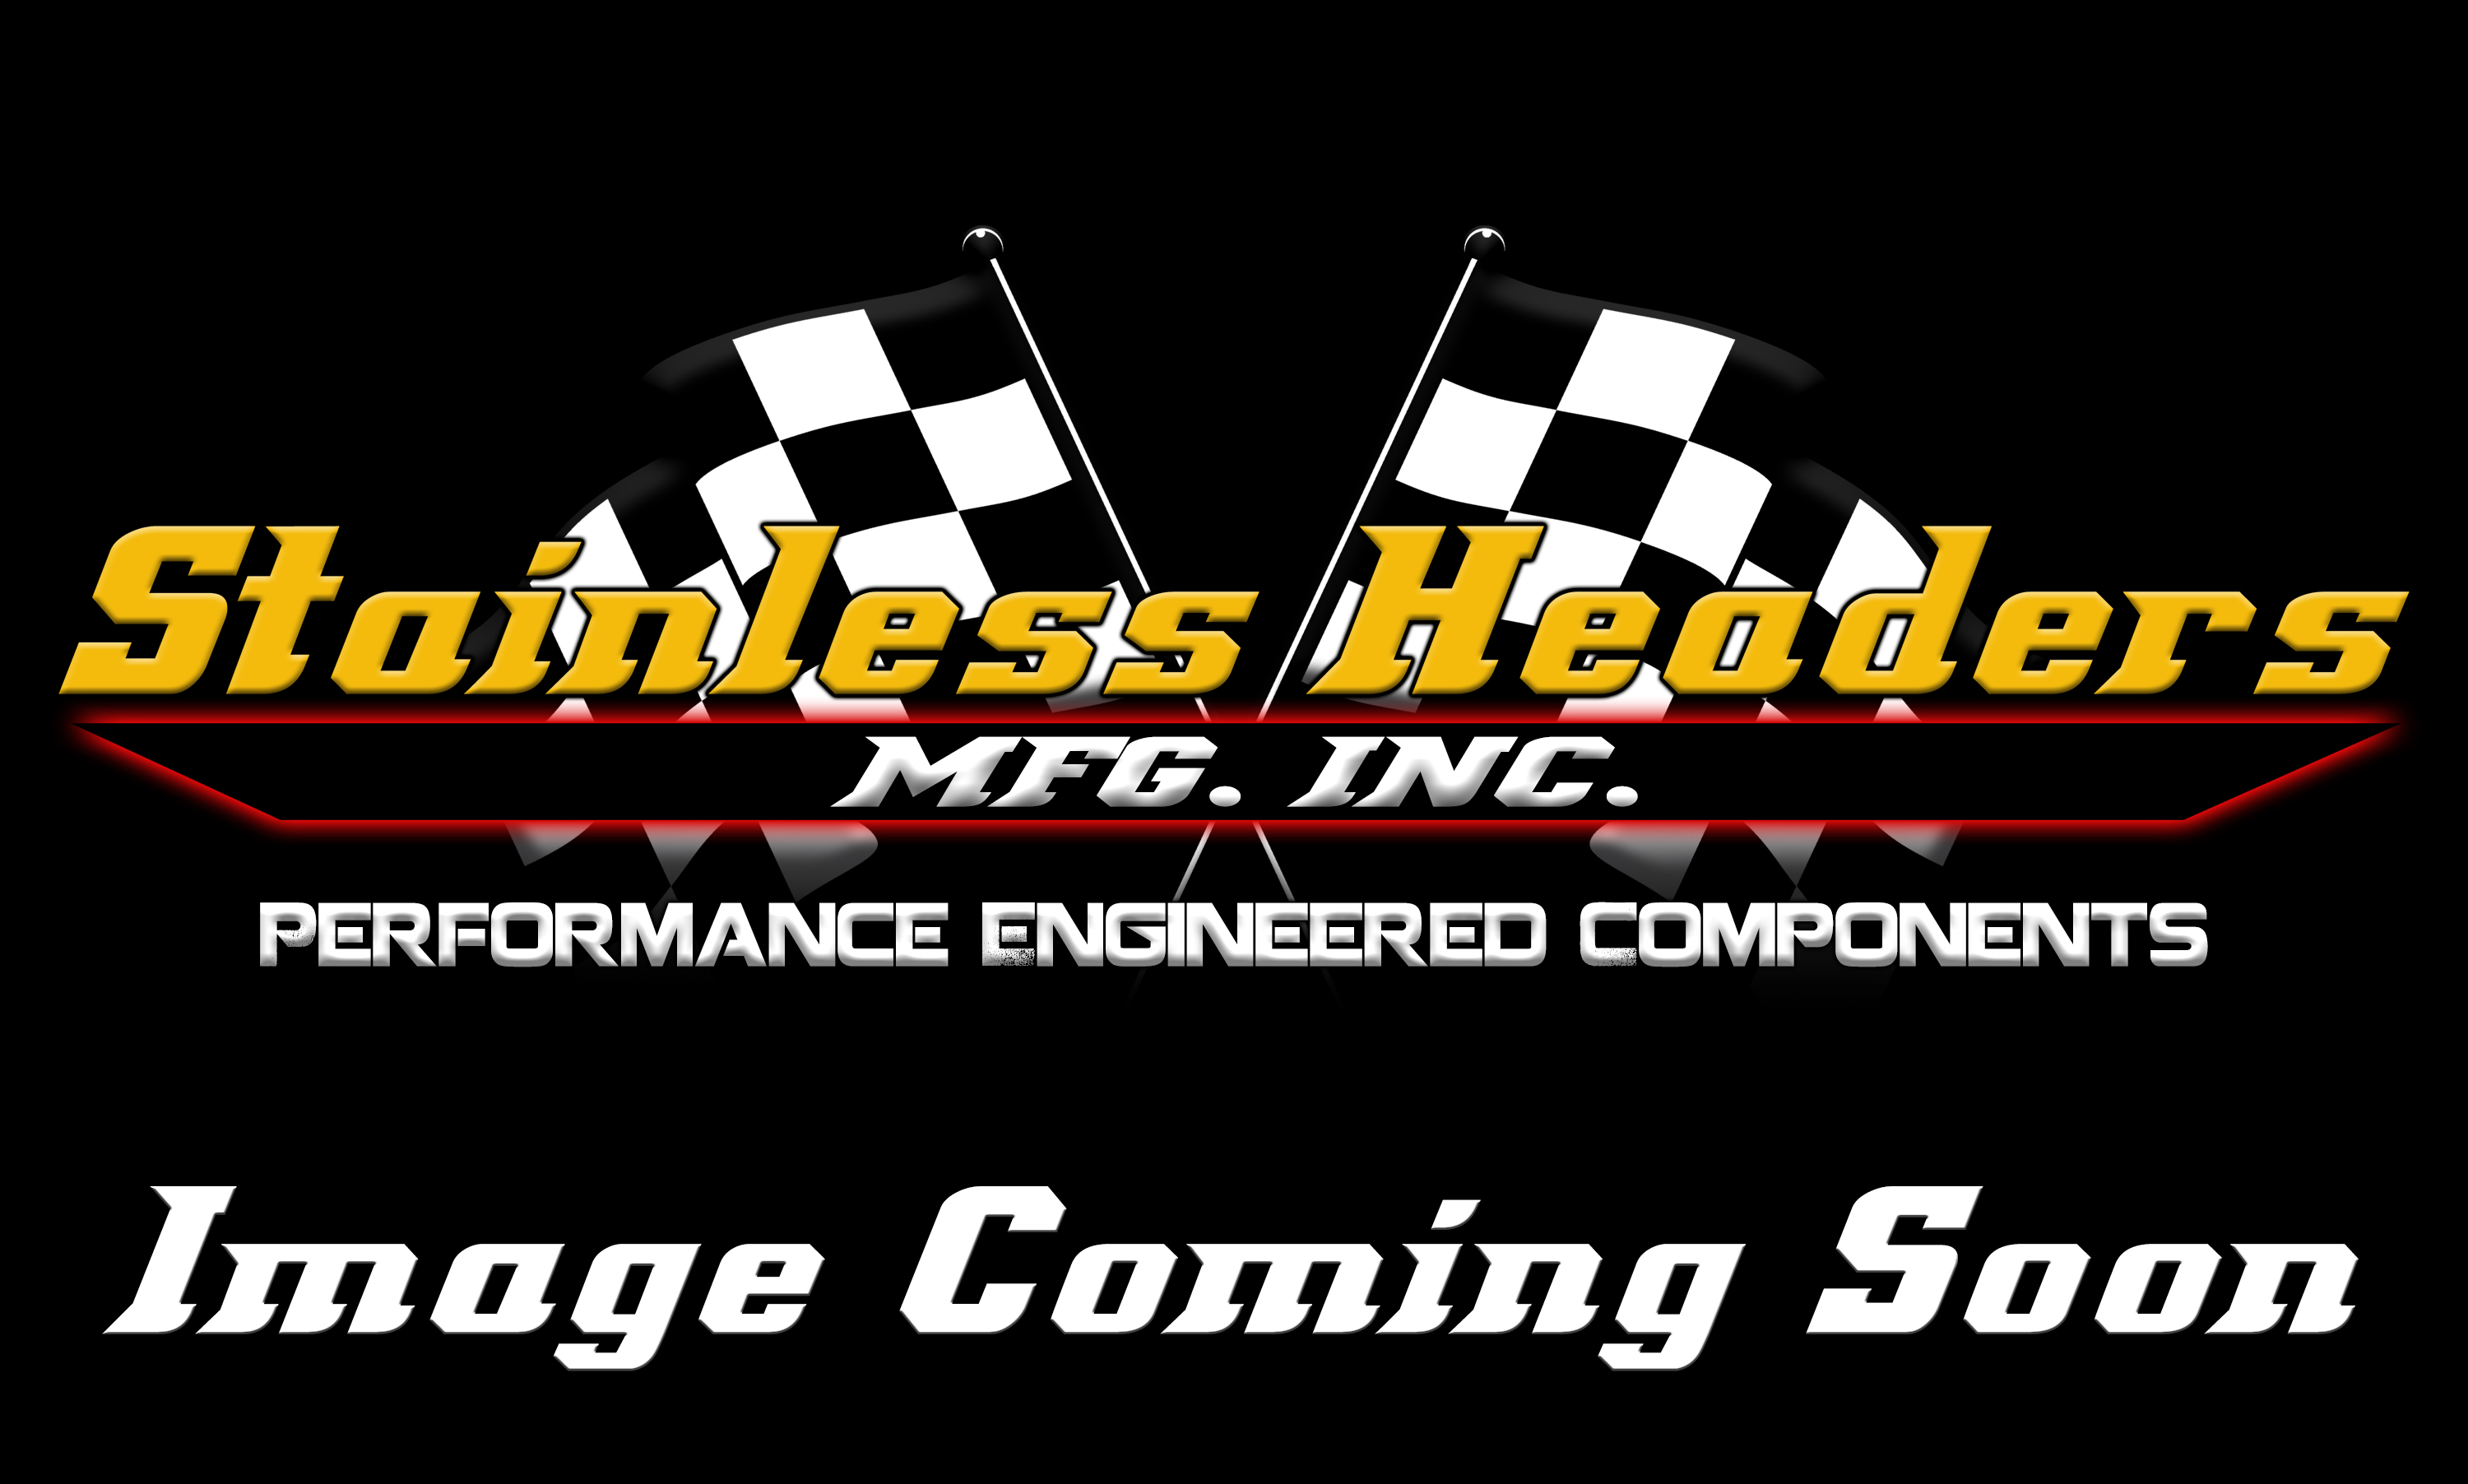 CompTurbo Technologies - CTR3281S-6062 Air-Cooled 1.0 Turbocharger (750 HP)